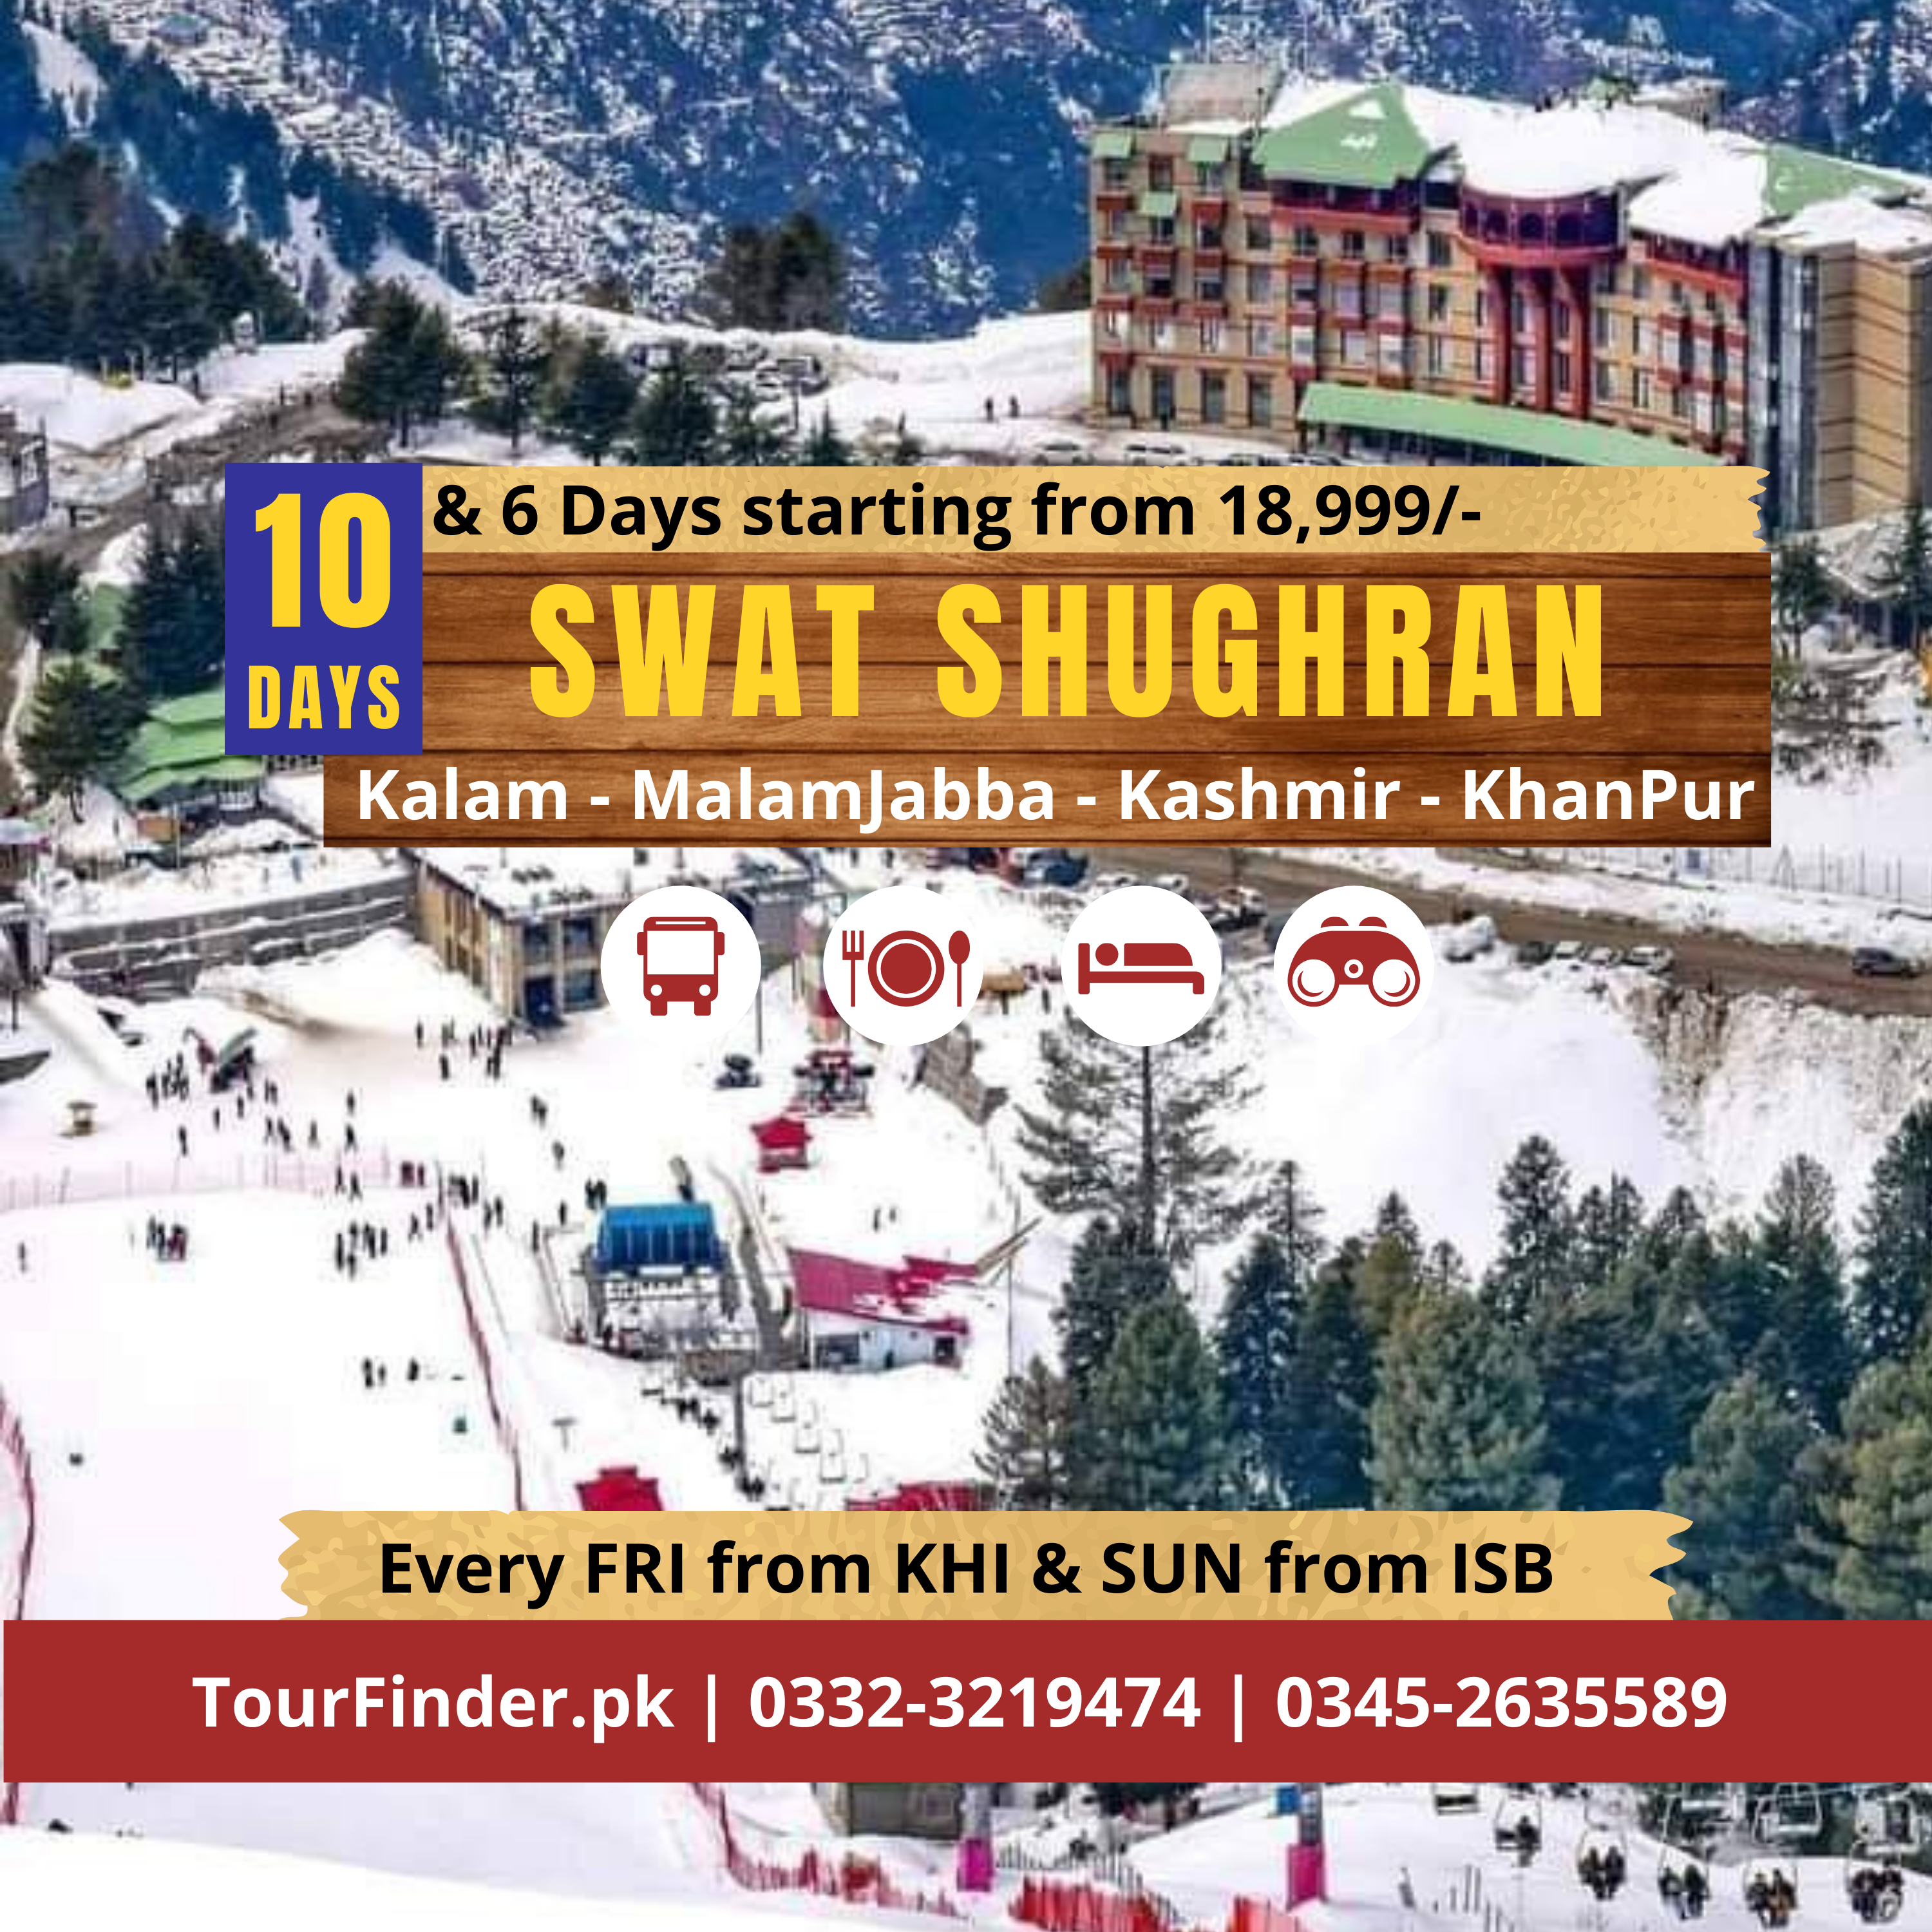 10 days trip to Swat Valley & Shughran Valley (Departure every Friday from KHI)